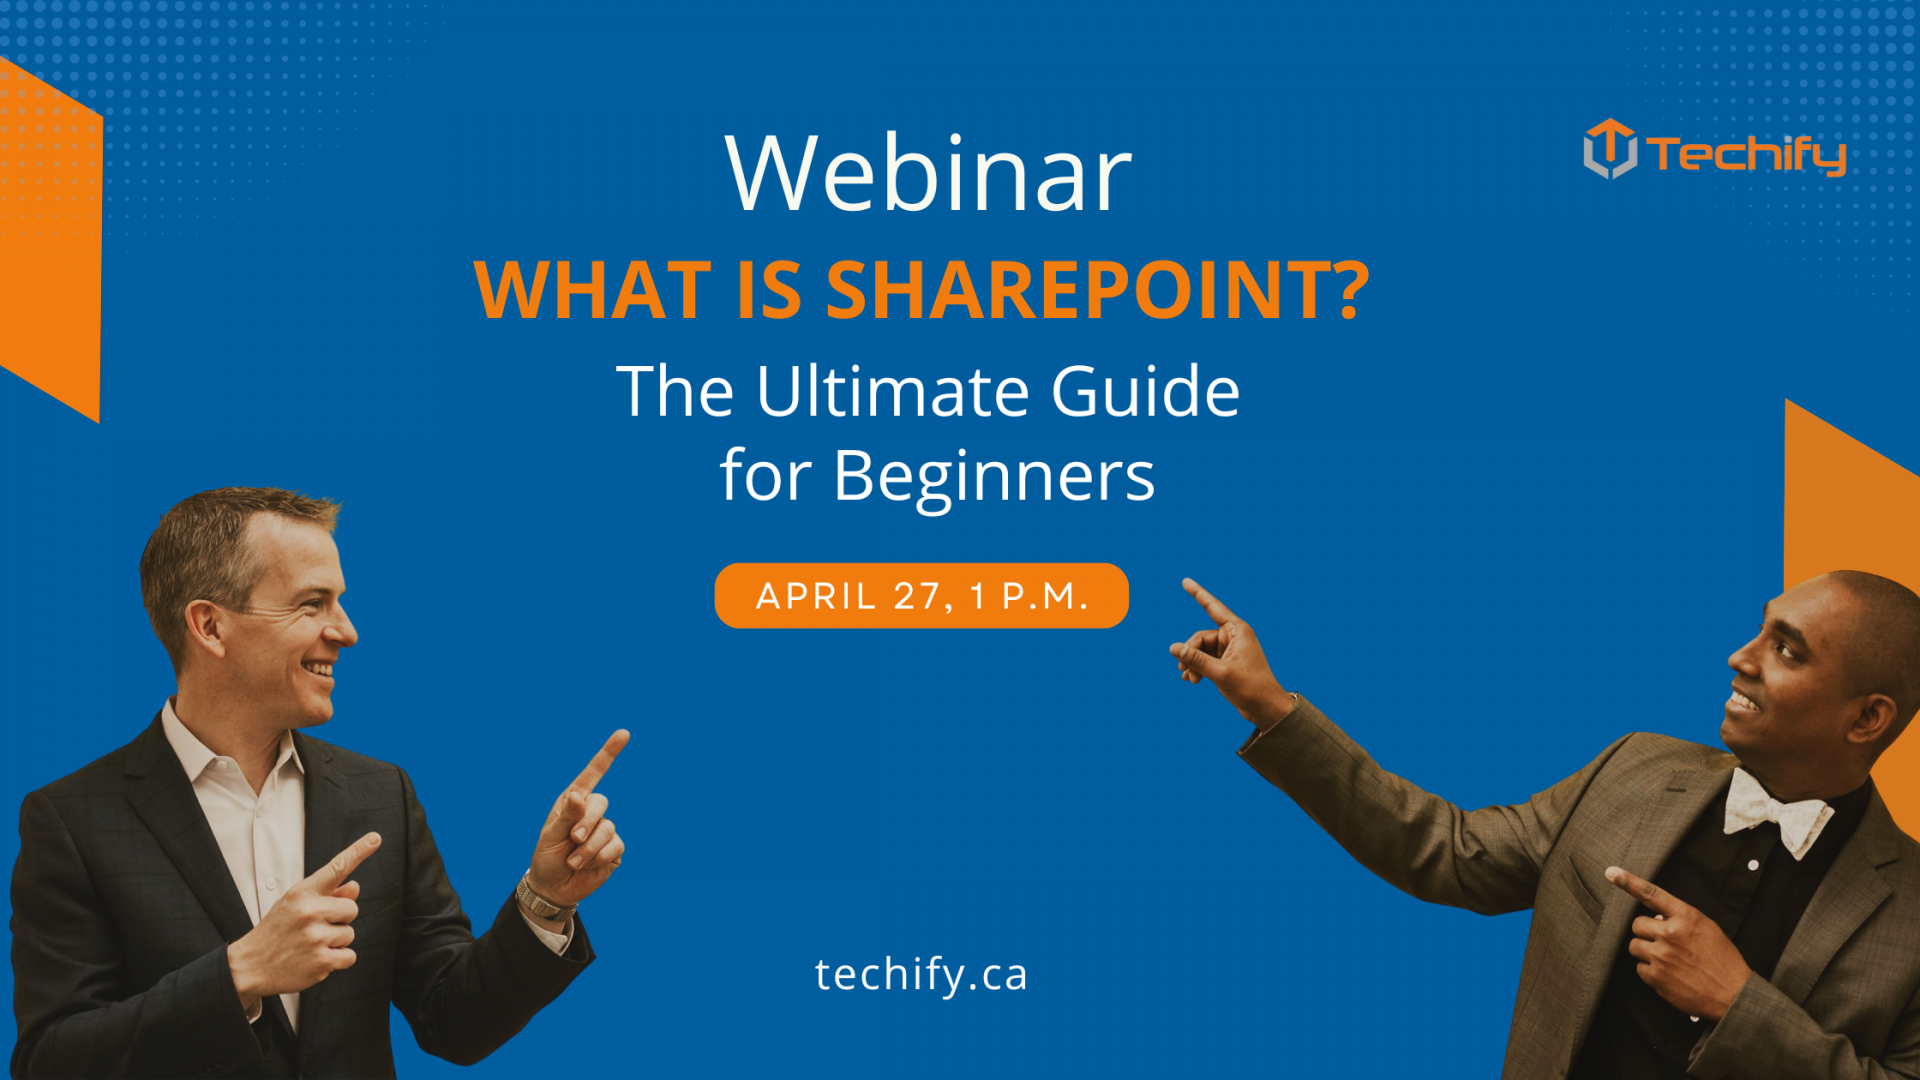 Graphic for the April 2022 webinar - Brendan and Jermaine pointing to the wording "What is SharePoint?"